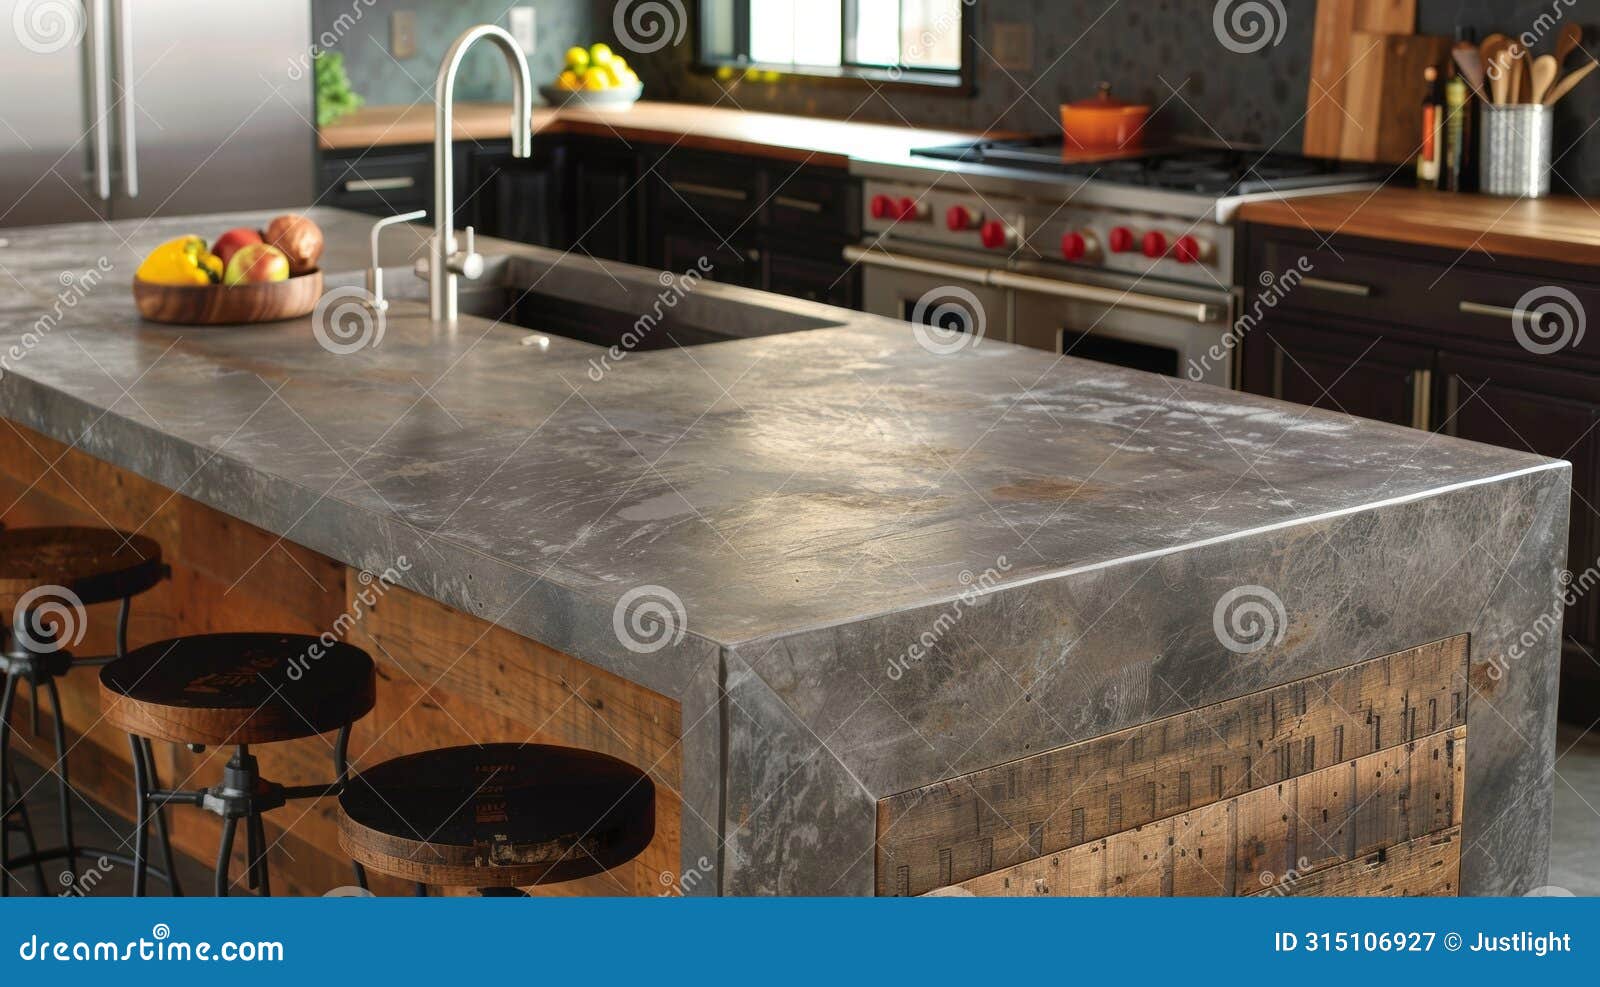 in a industrial style kitchen a large island with a stonelook lvt countertop serves as the focal point. the lvt not only